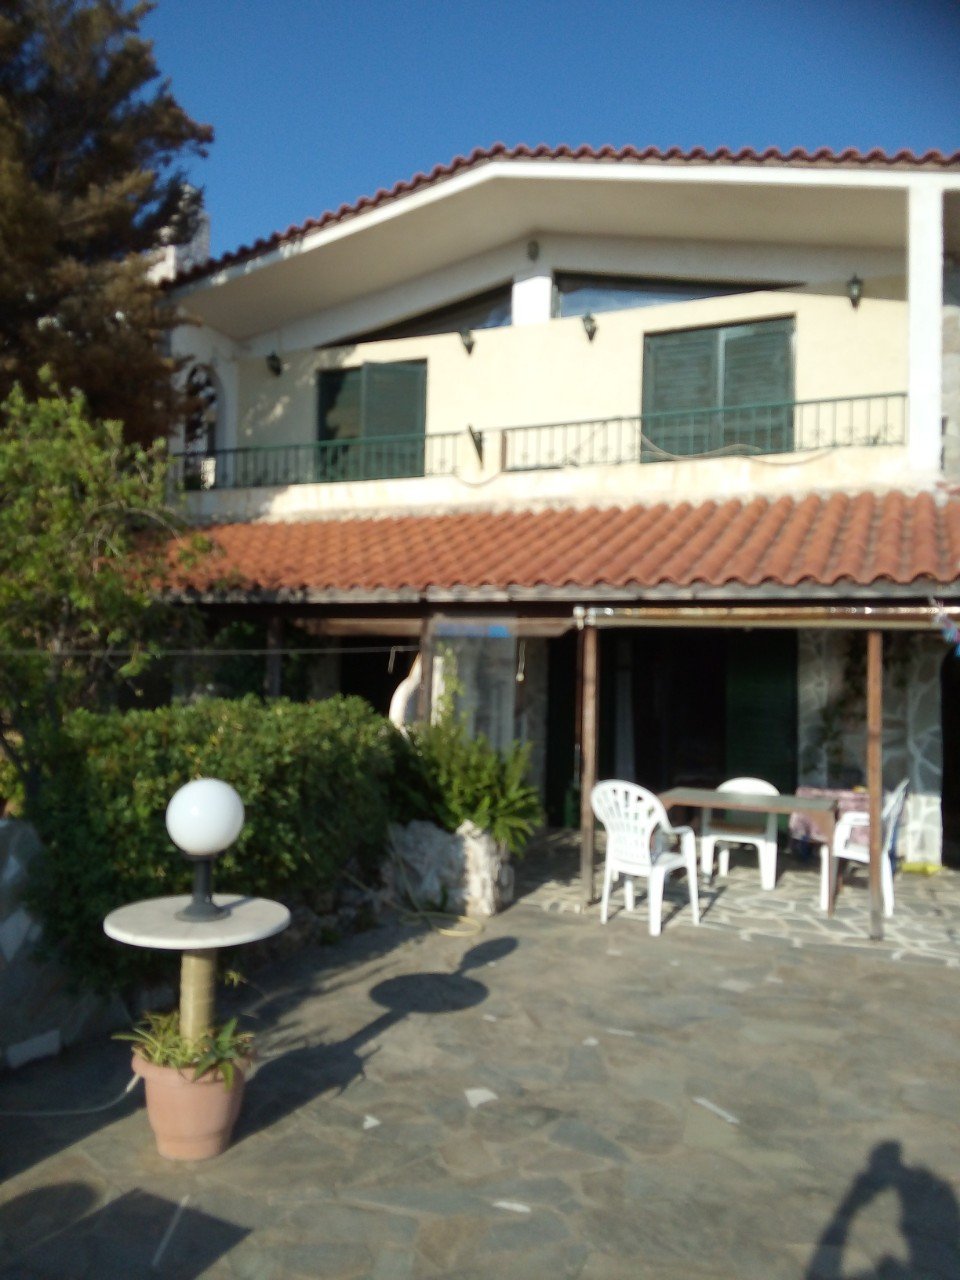 Property for Sale: House (Detached) in Pireas, Athens  | Key Realtor Cyprus